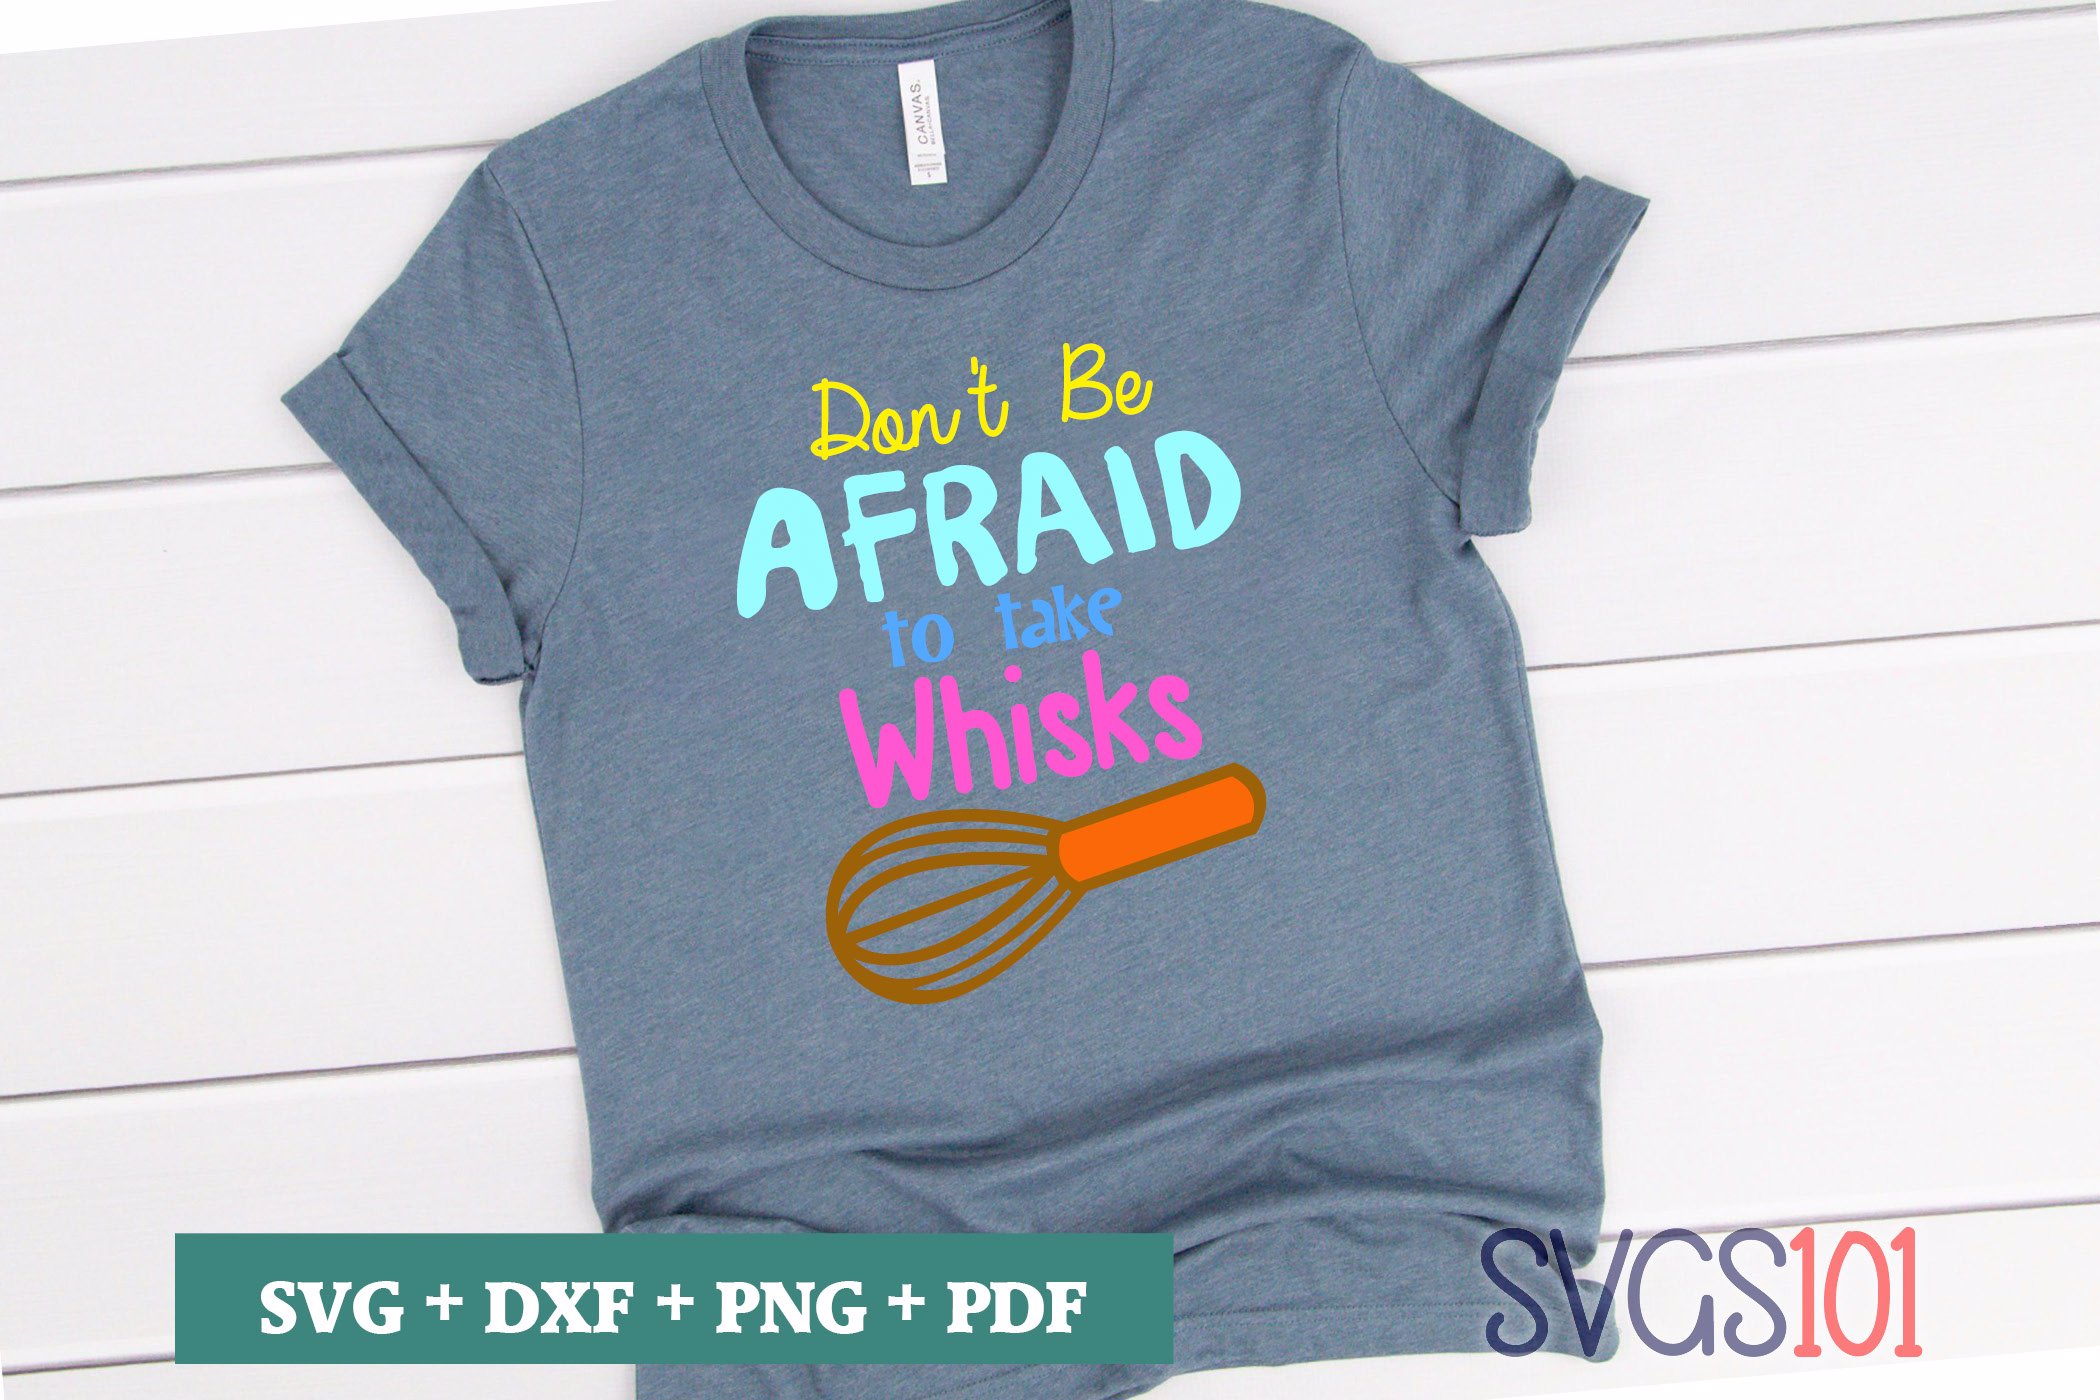 Don't Be Afraid To Take Whisks SVG Cuttable file - DXF, EPS, PNG, PDF ...